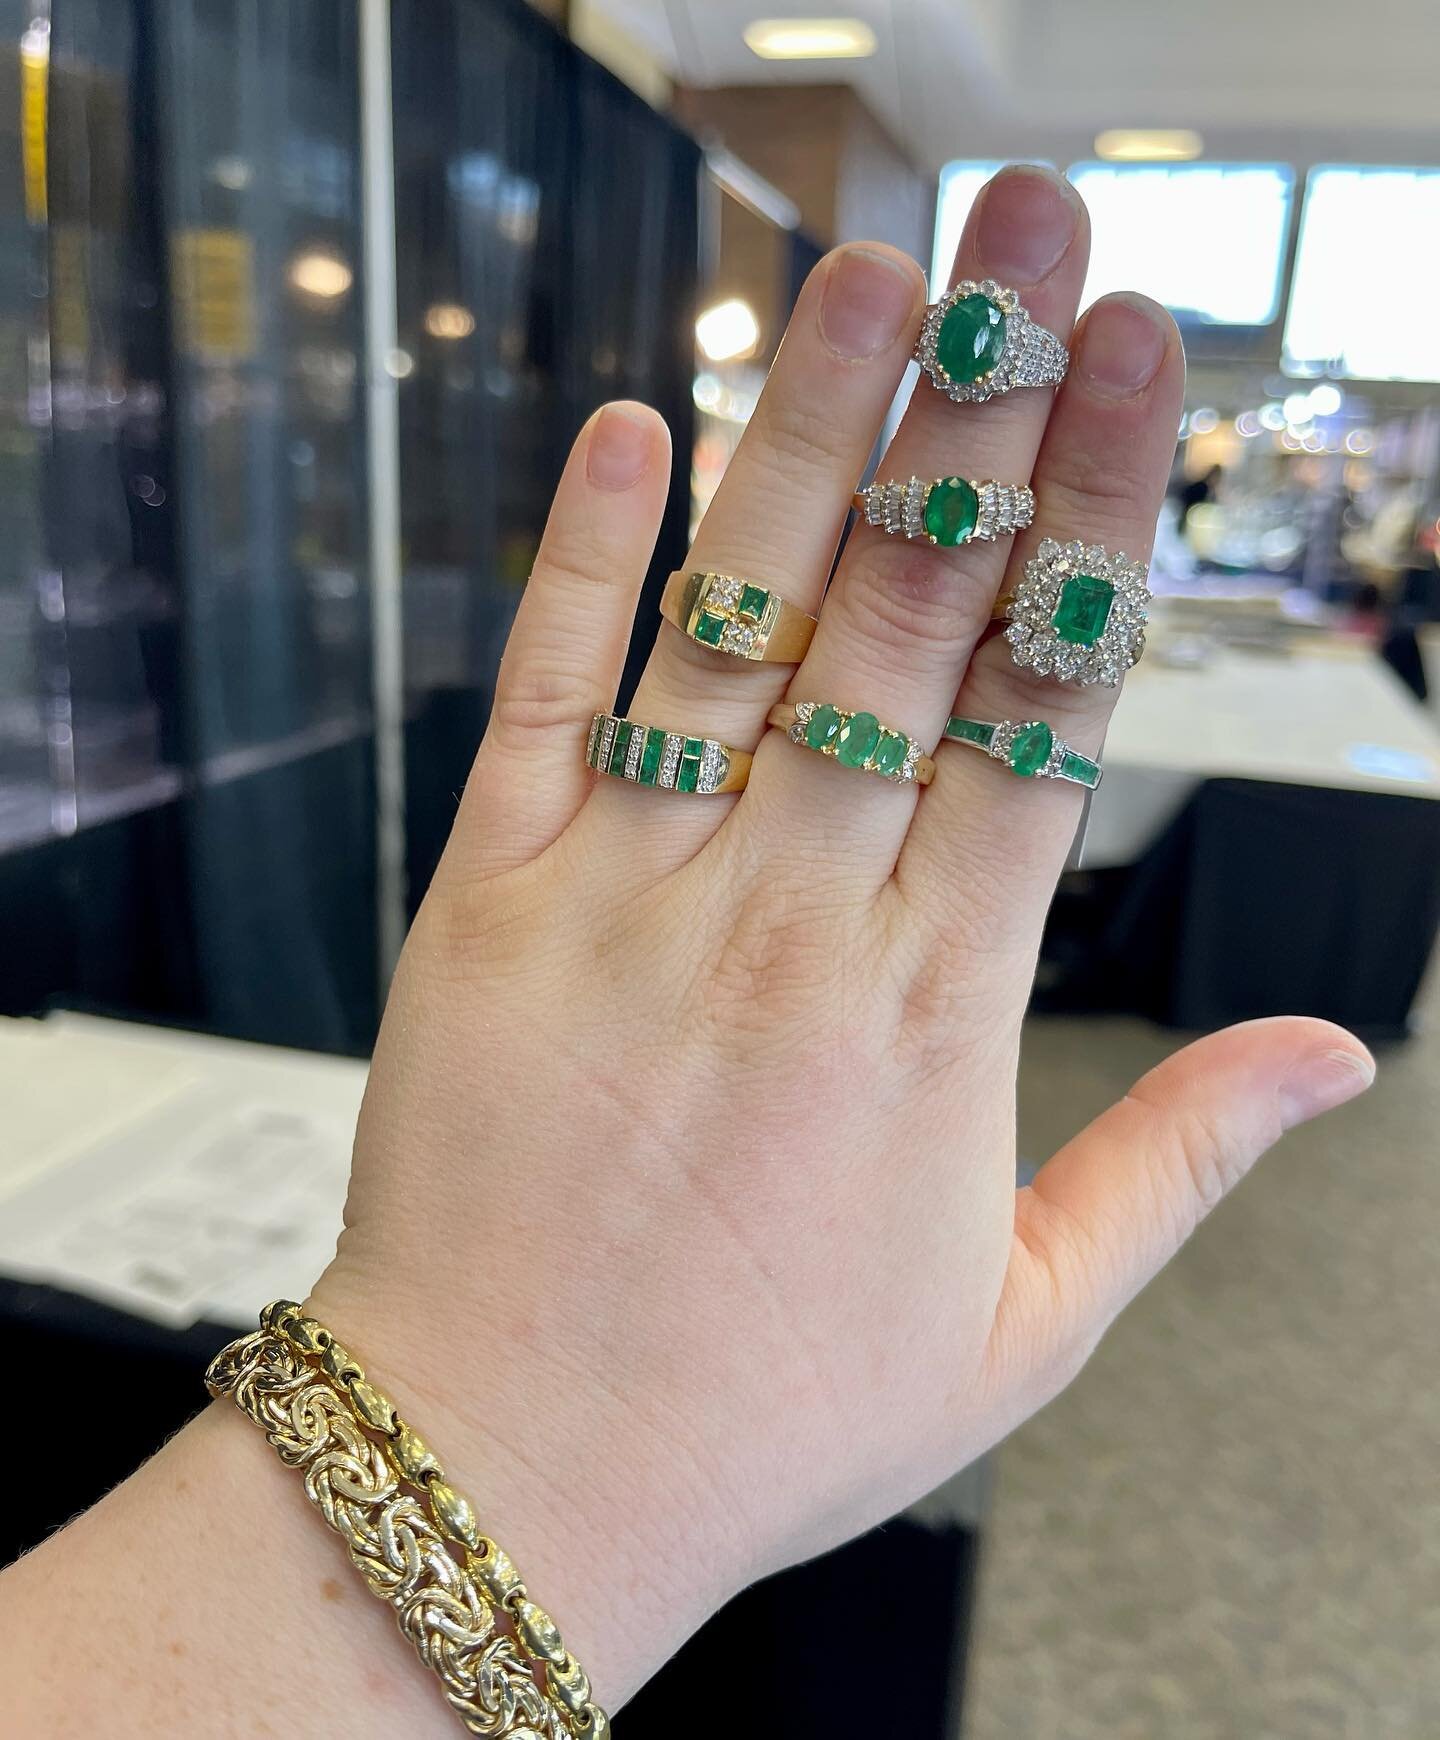 Emeralds! Cherished since Ancient Egyptian times and famously favoured by Cleopatra. Which one of these rings is your favorite? 🟢 

#emeraldring #antiquejewelry #estatejewellery #unique #oneofakindjewelry #emerald #vintagefashion #vintagefinds #chic